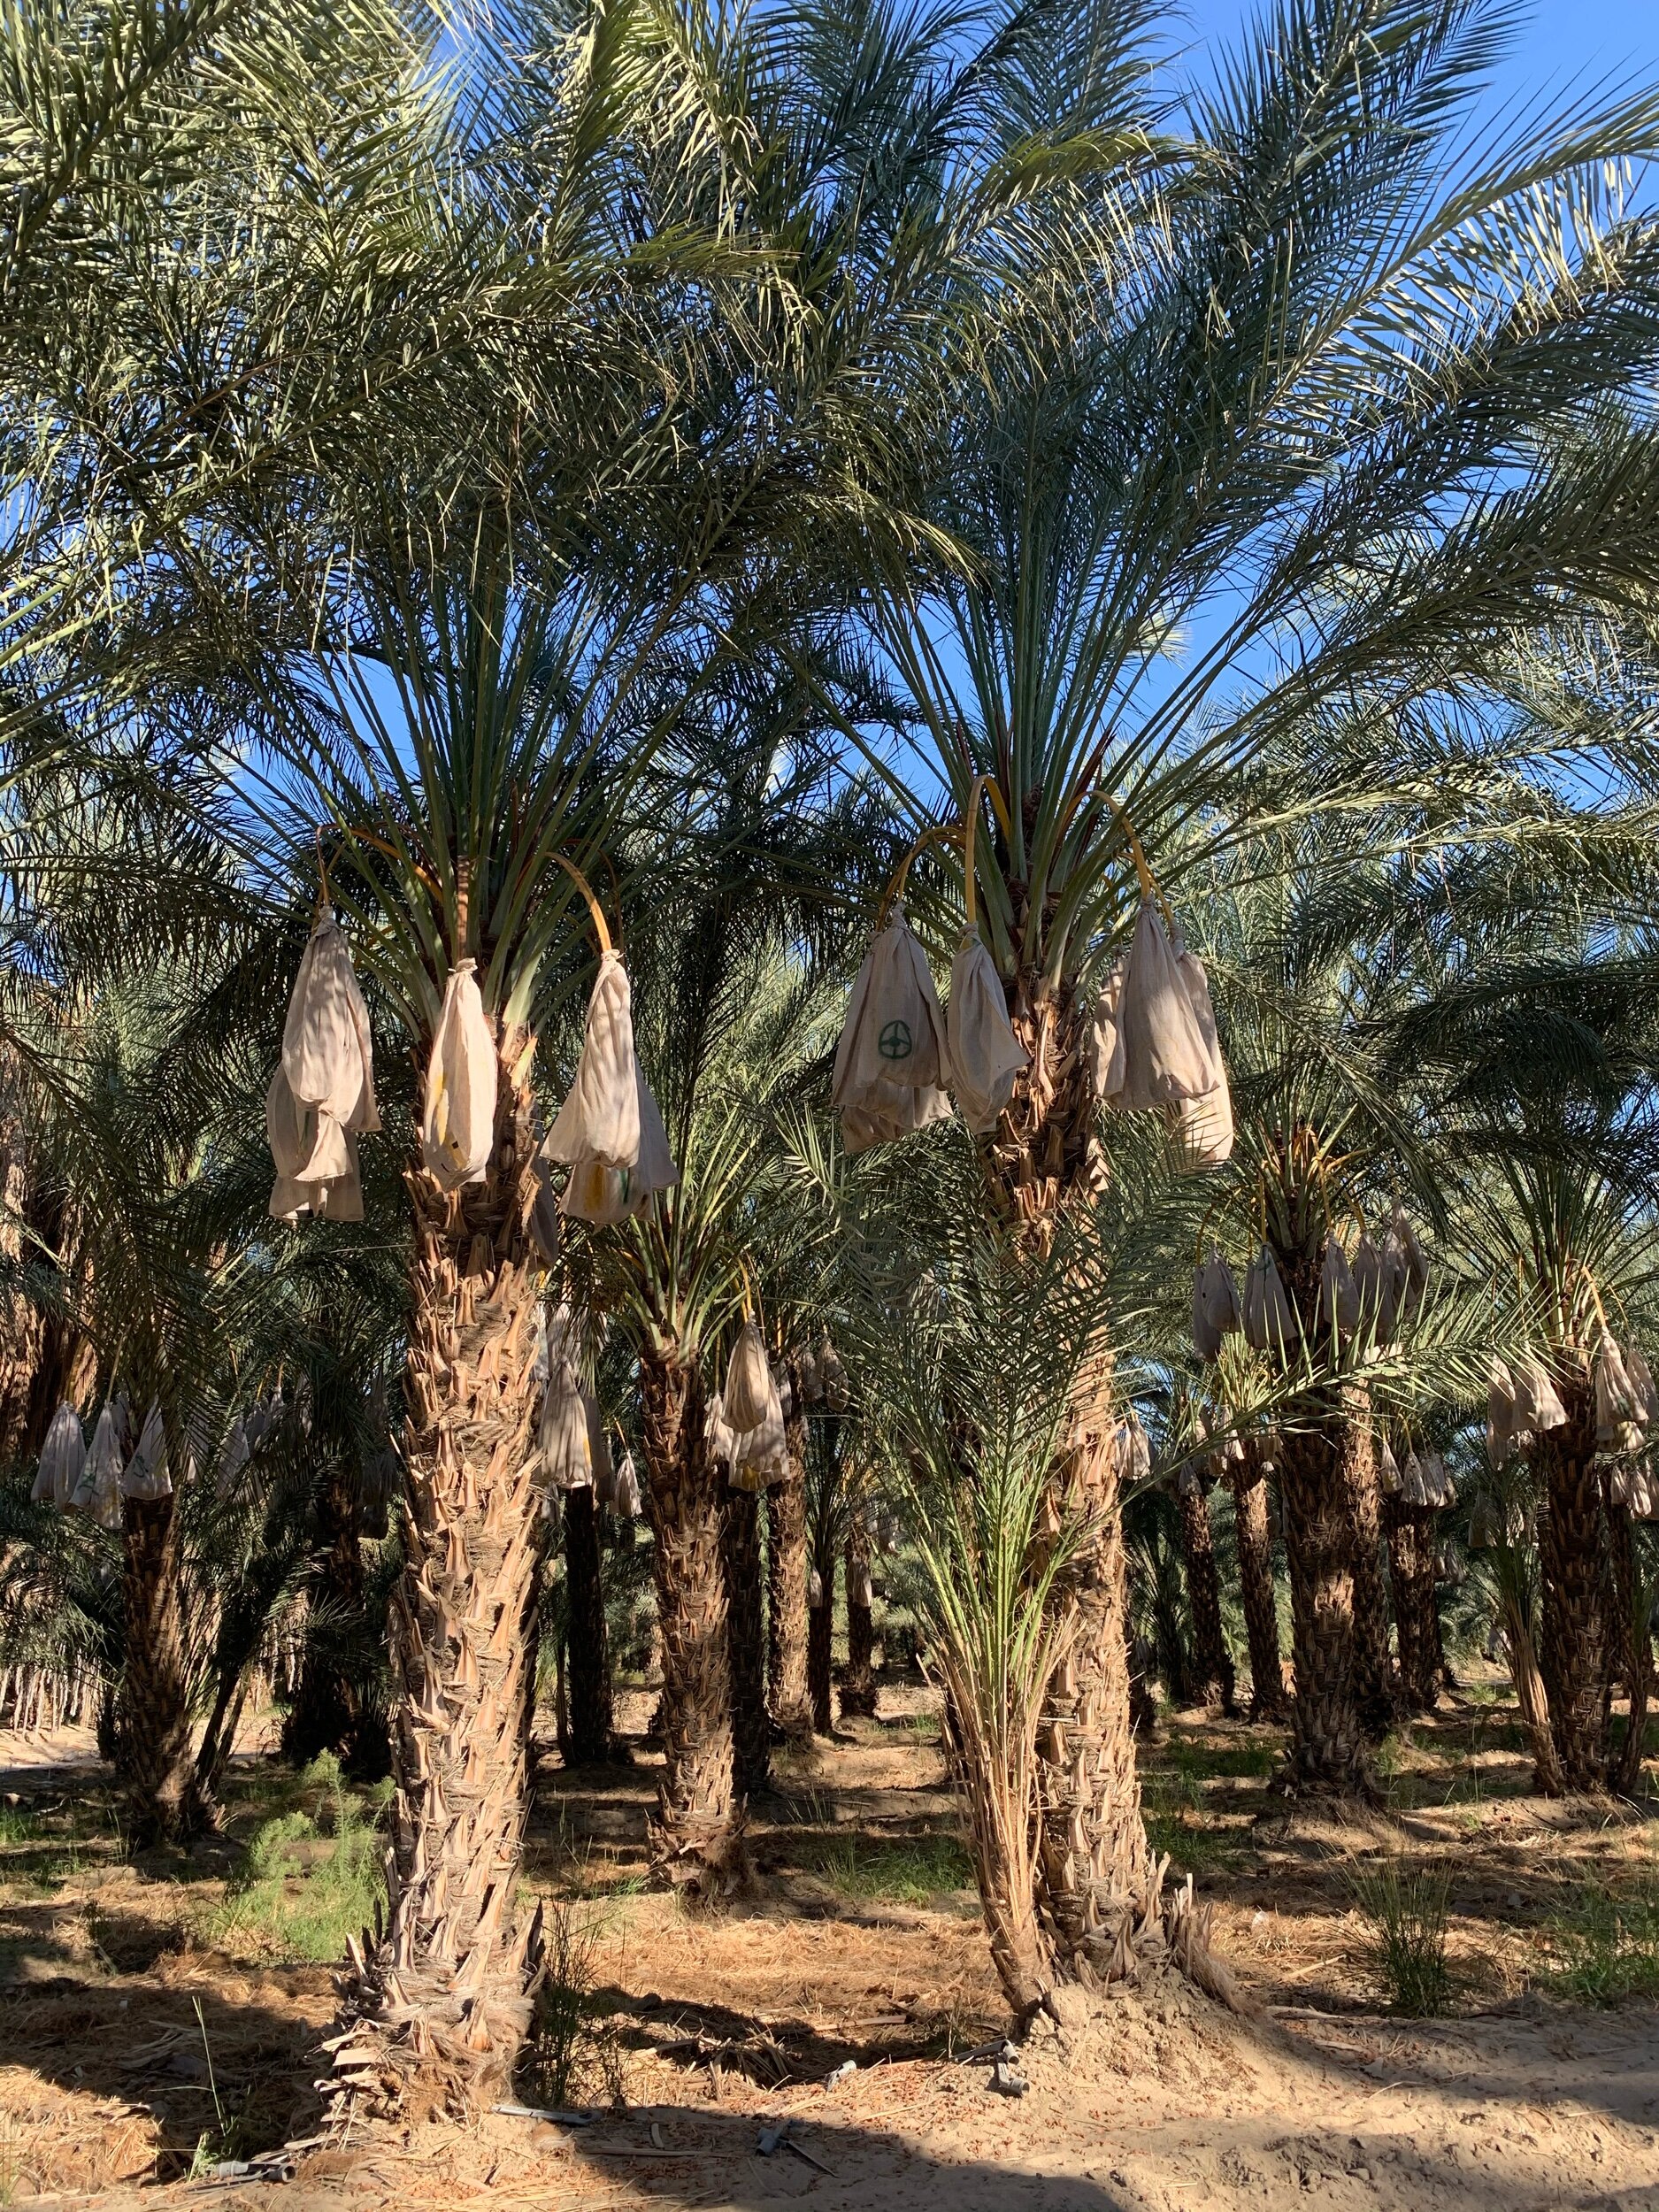  Did you know  dates  are one of the most labor-intensive and expensive crops to grow? With no significant natural pollinators, female date palms are&nbsp; hand-pollinated &nbsp;from the male palms  by humans . The roots need tons of water, but the p